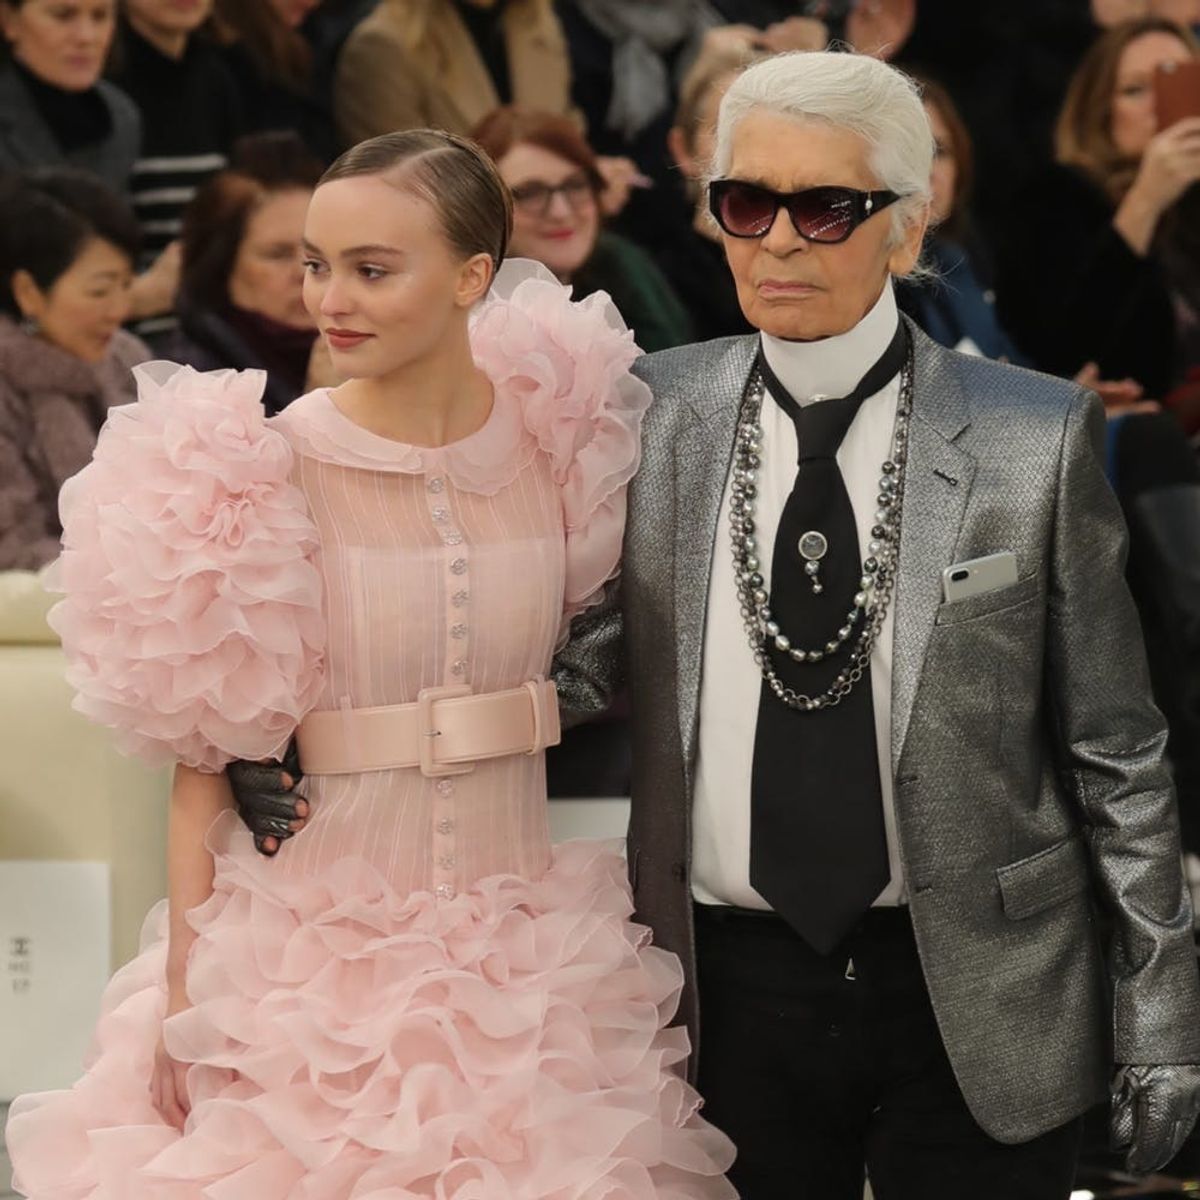 Chanel’s 2017 Spring Couture Collection Was Inspired by a… Spoon?